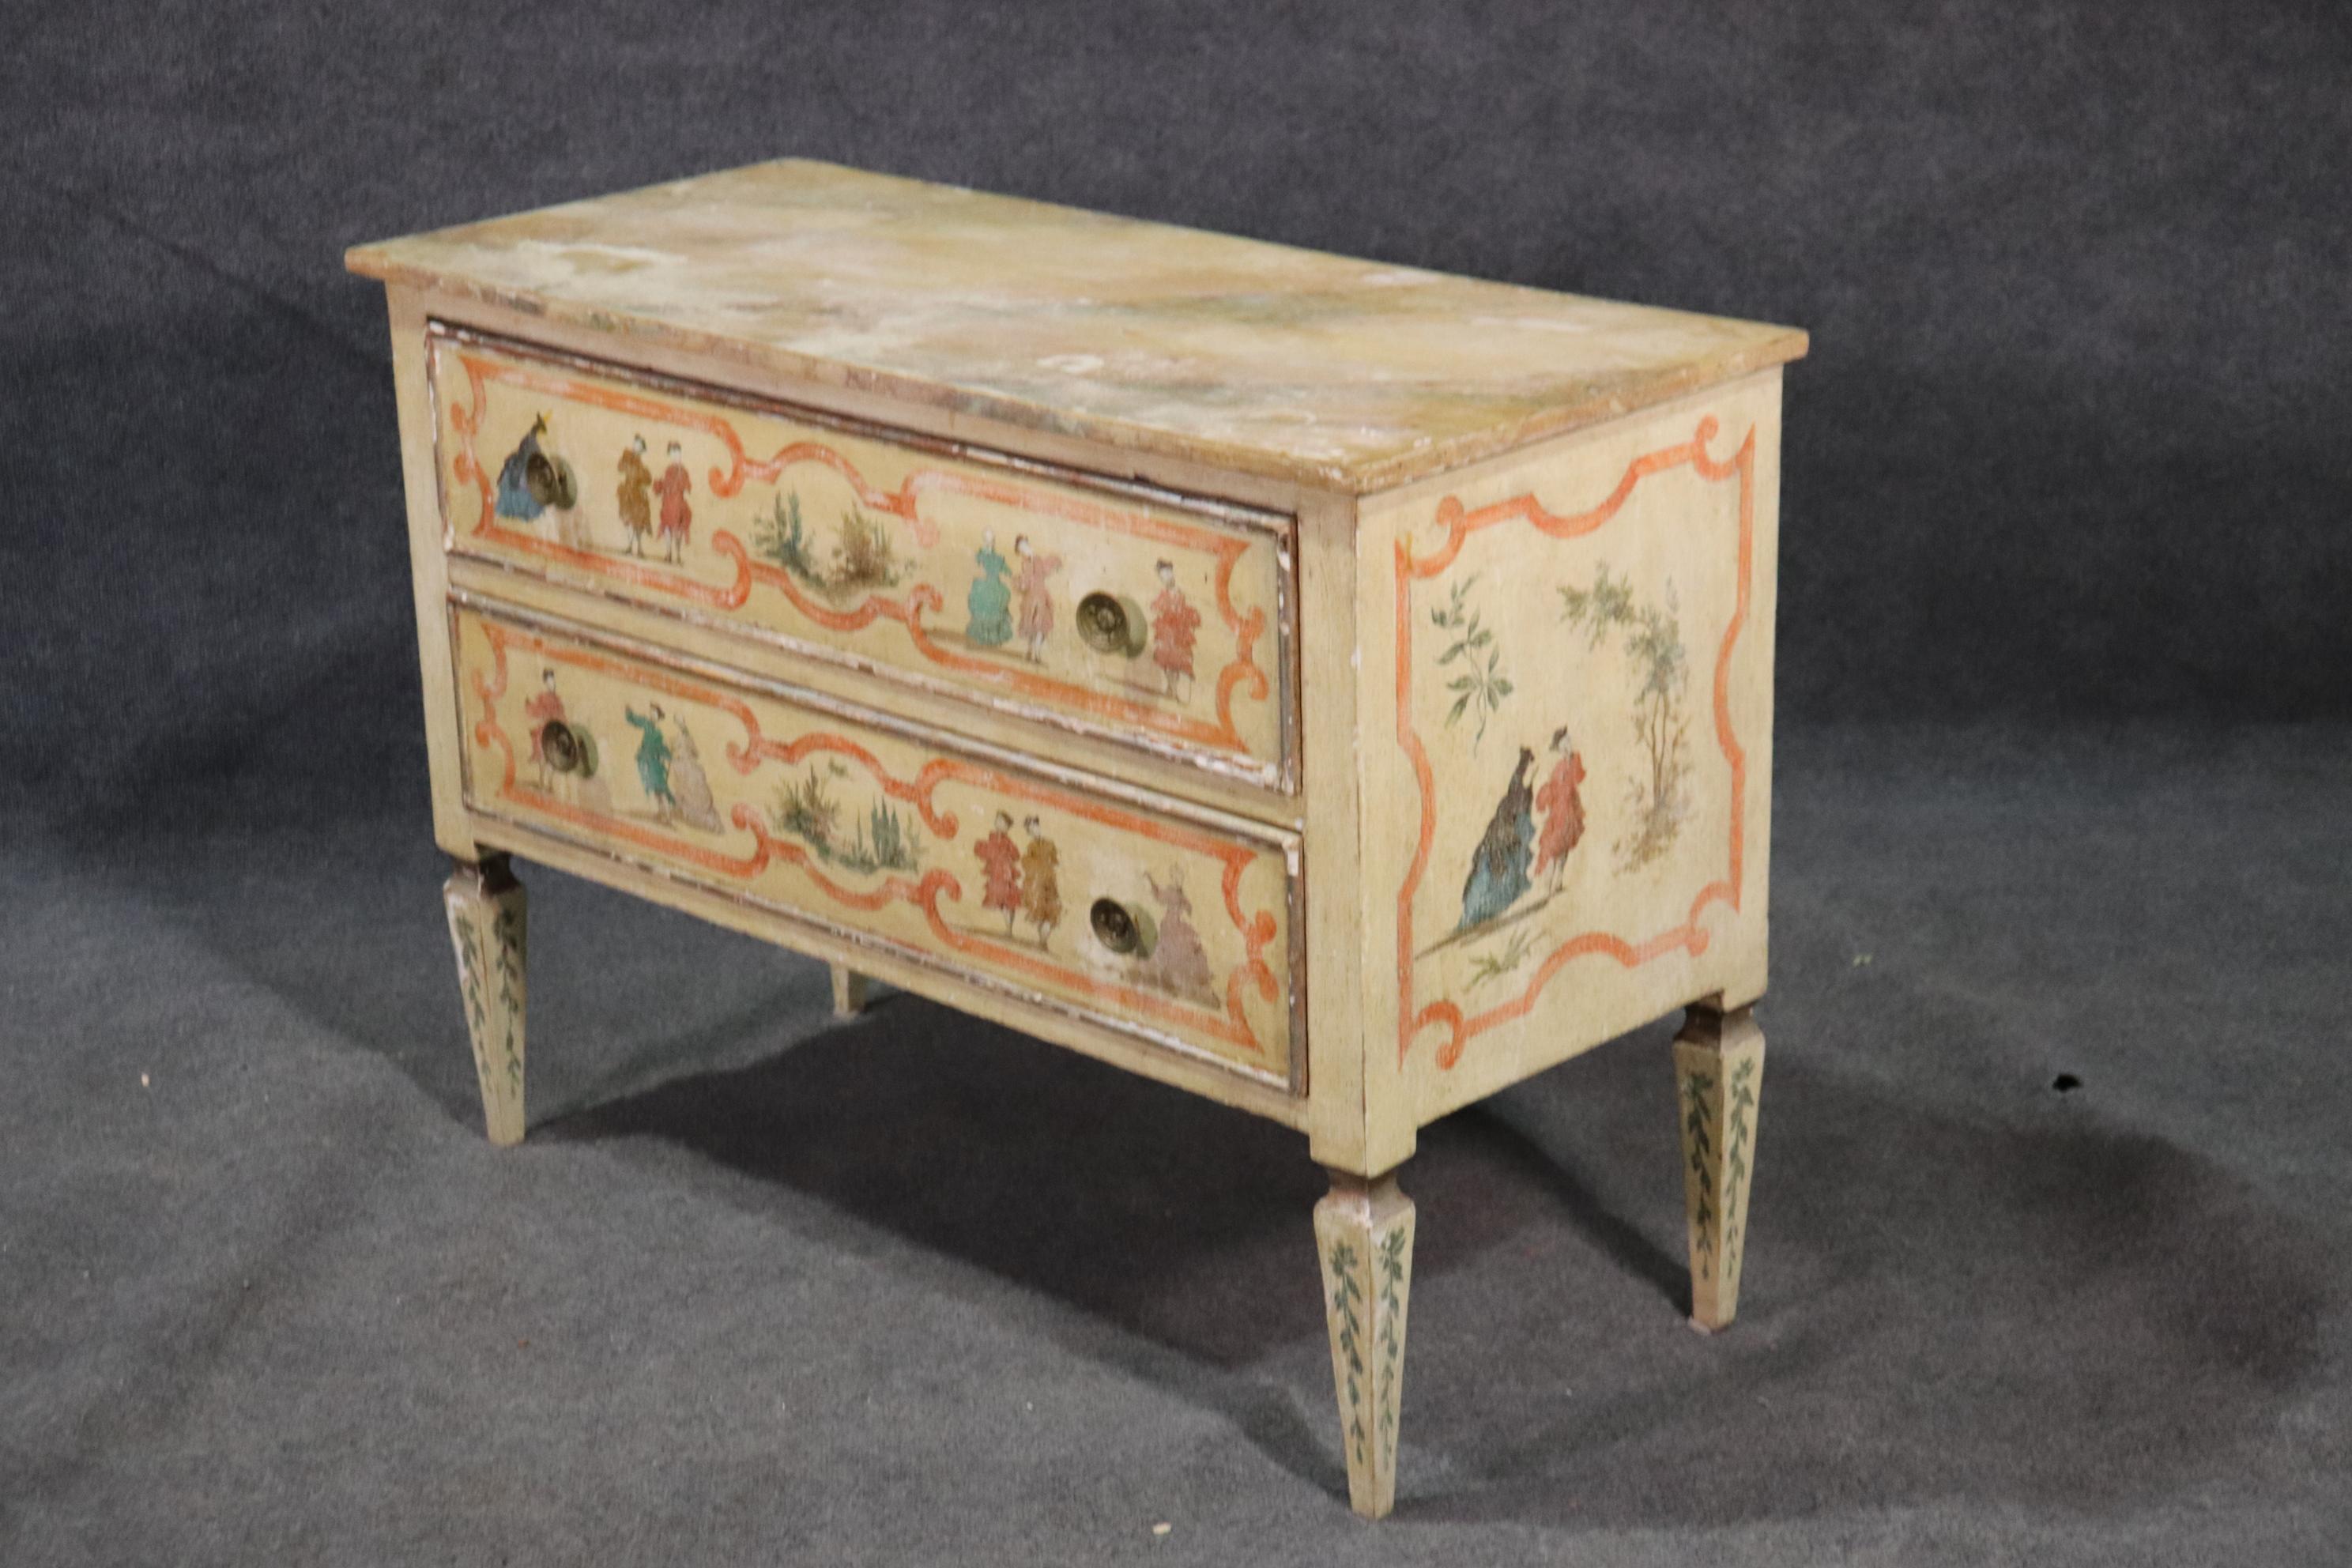 This is a beautiful painted decorated and faux marble painted commode. The commode dates to the latter part of the 1800s. The commode measures 40 wide x 18 deep x 29 tall.